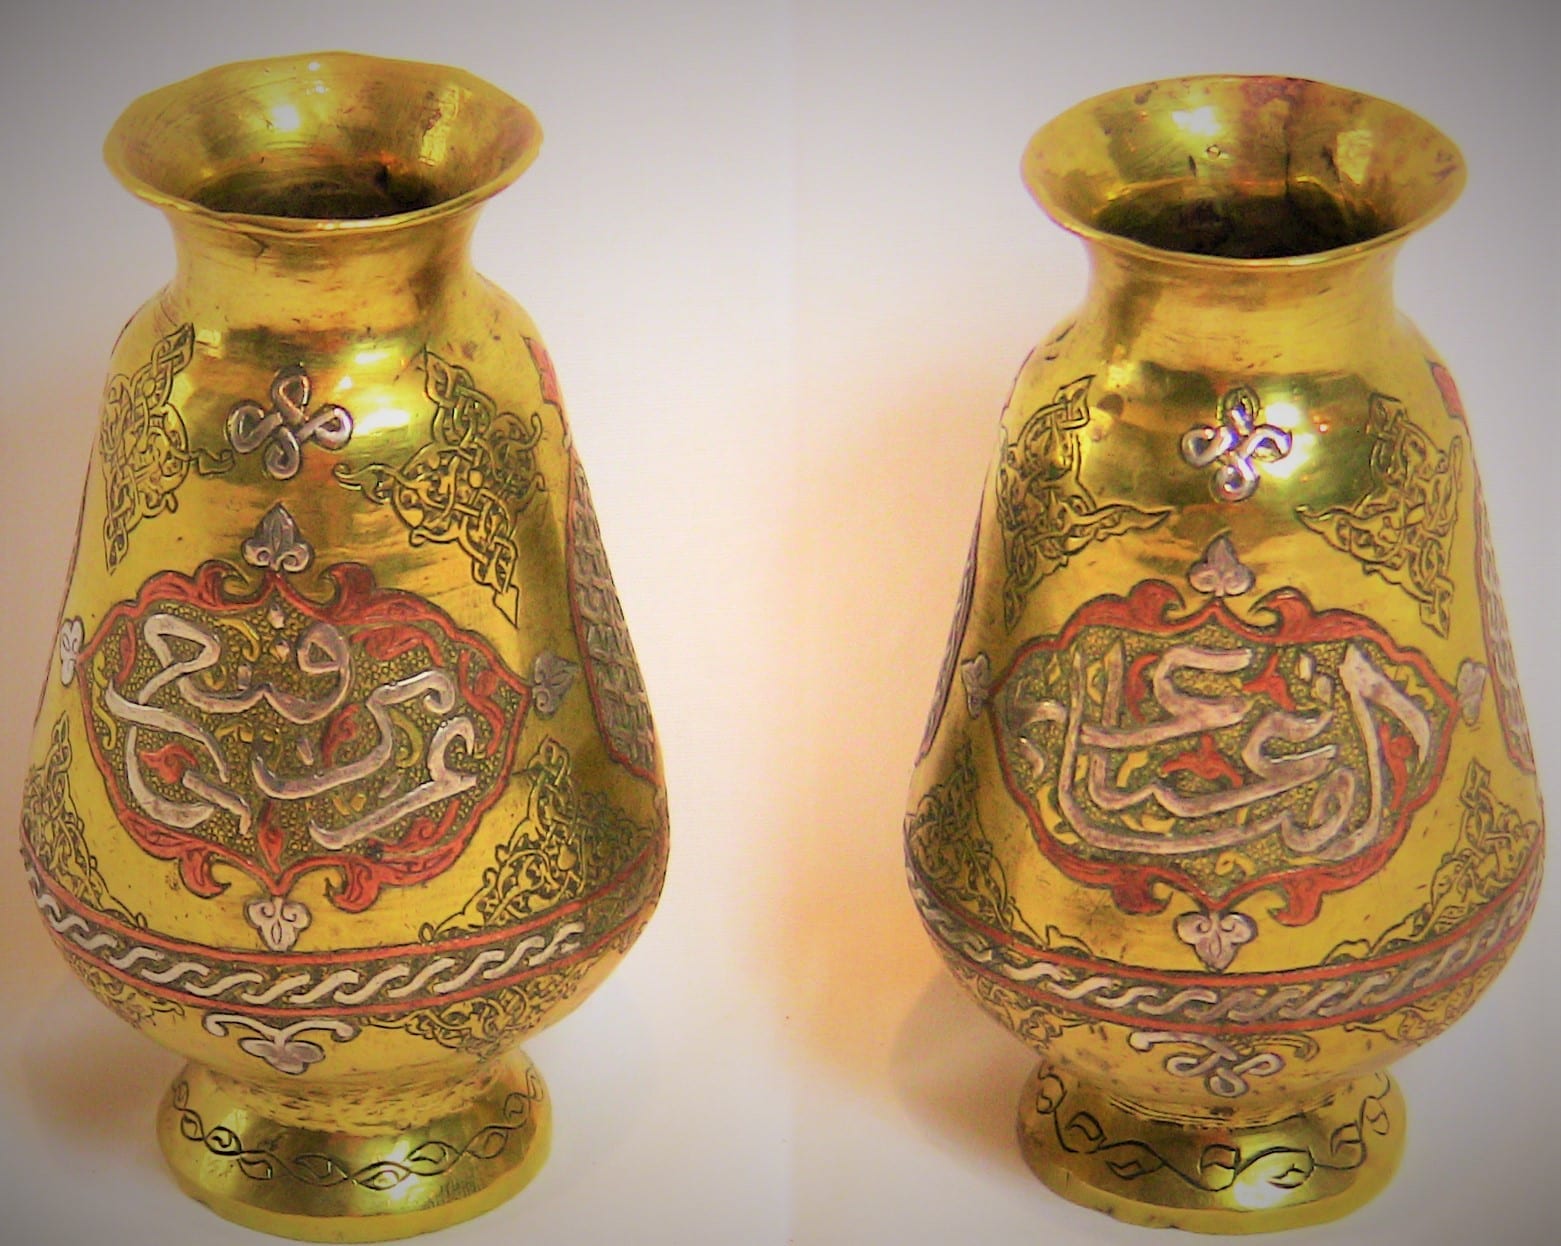 Pair of 18C Damascene Brass Vases inlaid with Copper and Silver